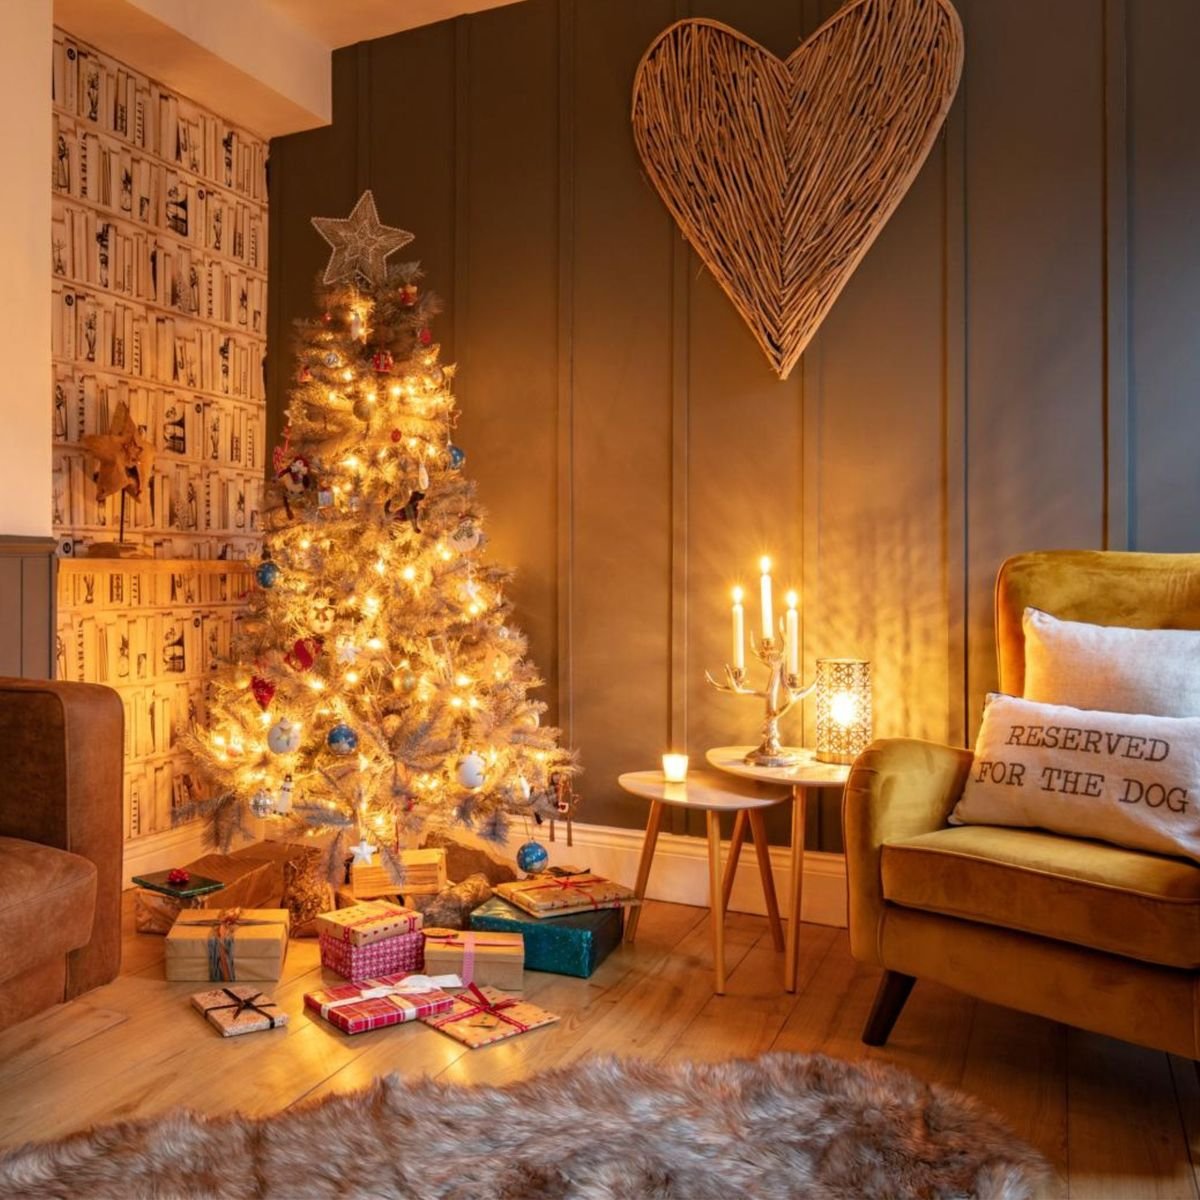 Christmas tree ideas to inspire your festive decorating scheme this year